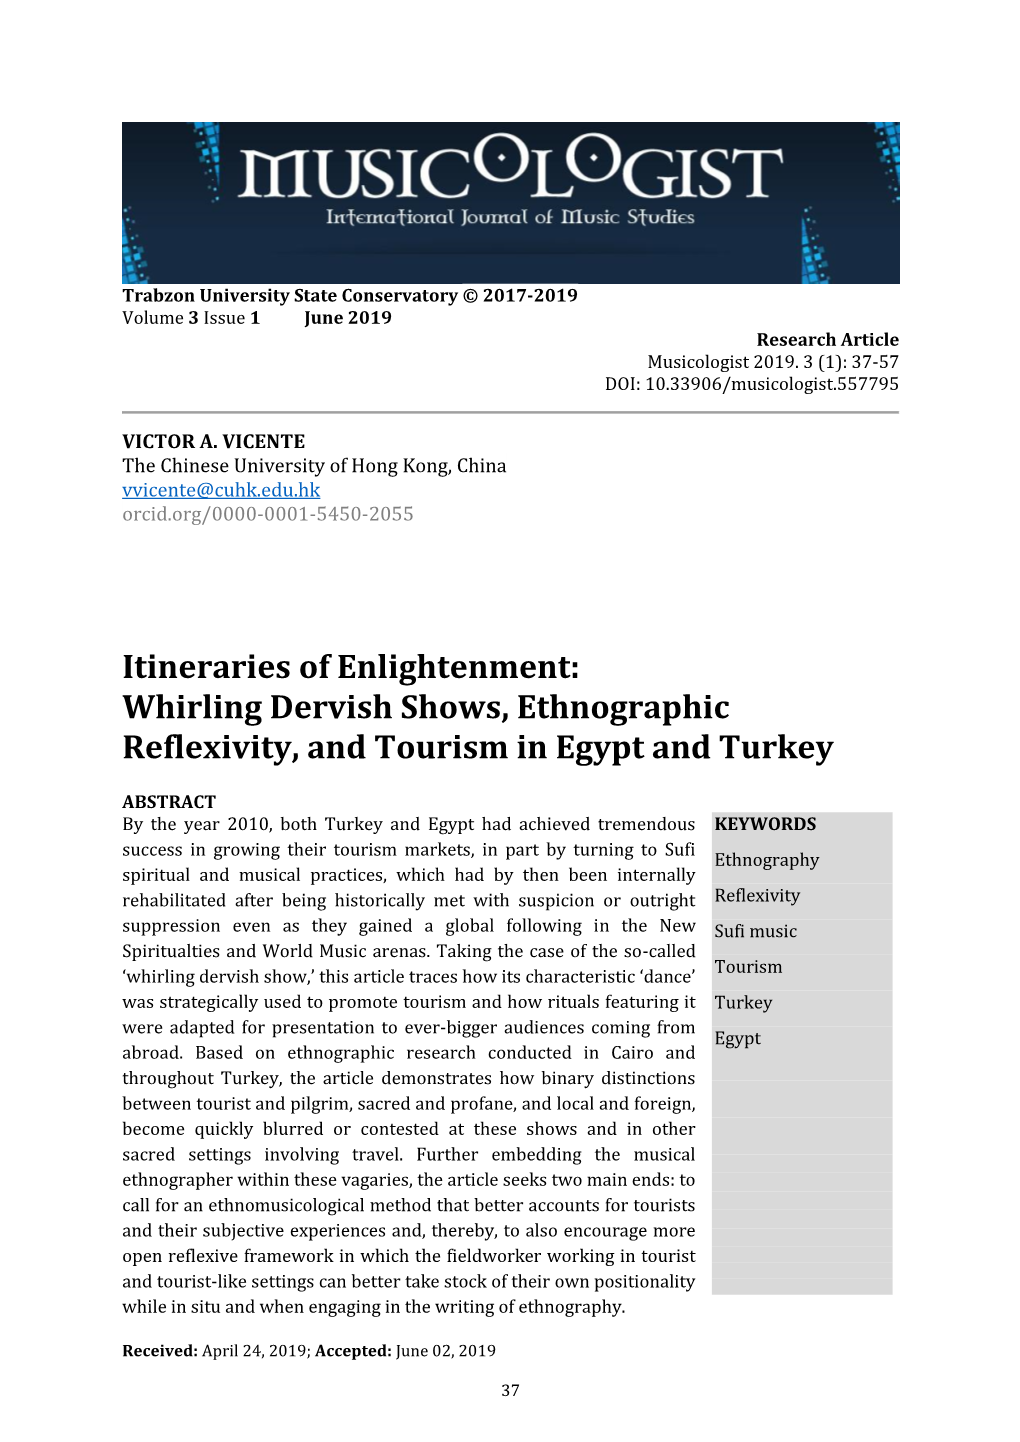 Whirling Dervish Shows, Ethnographic Reflexivity, and Tourism in Egypt and Turkey